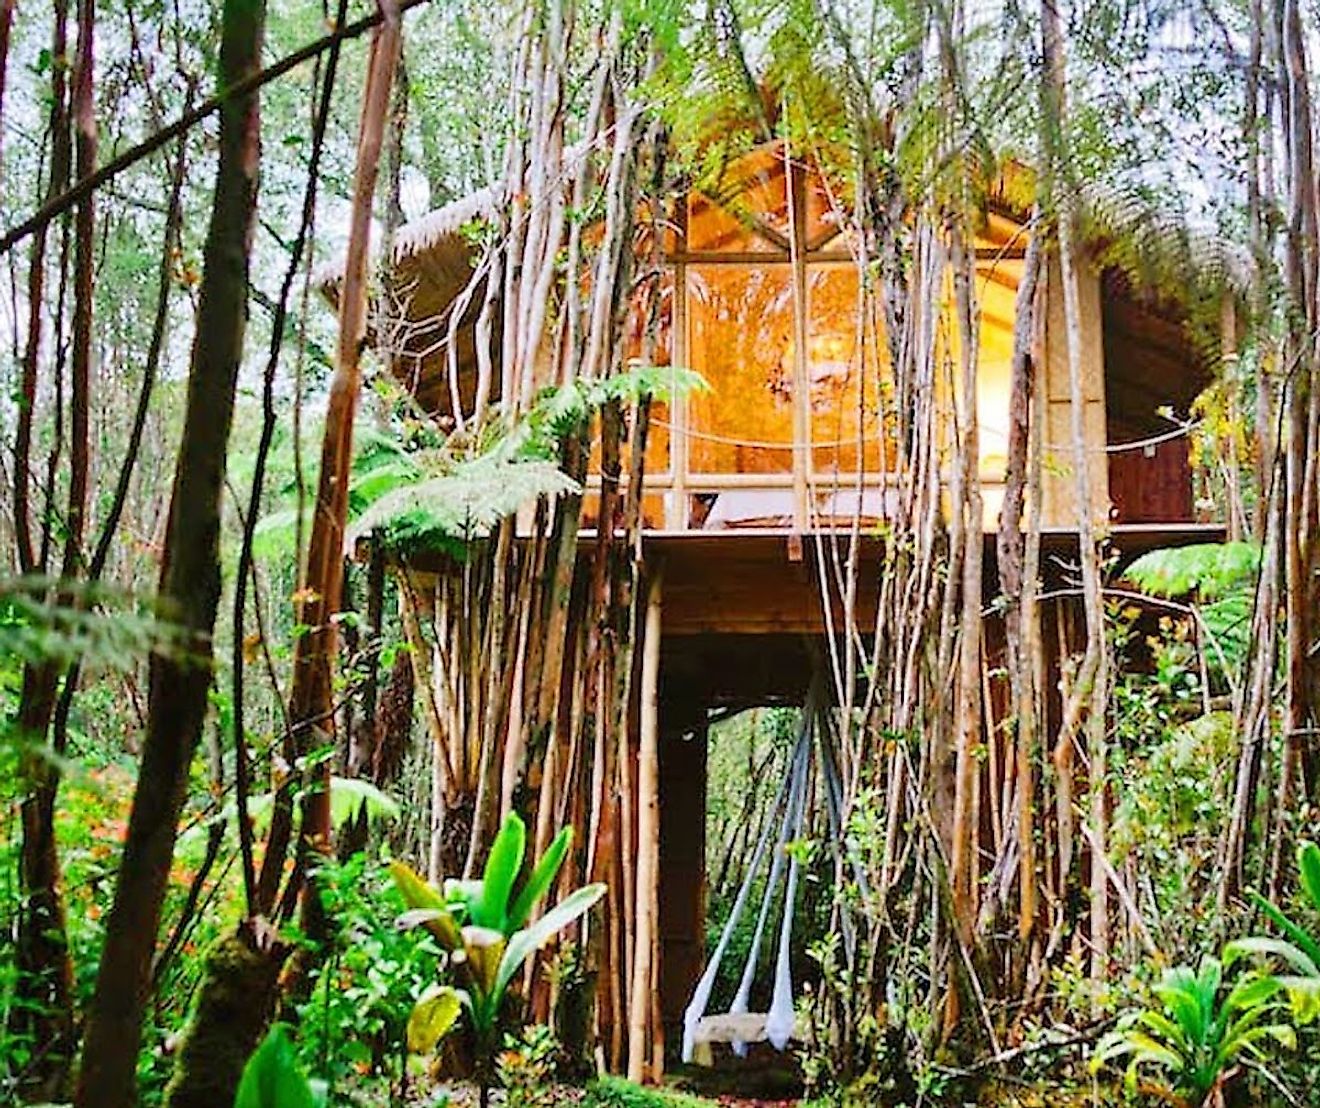 Dreamy Tropical Treehouse, Hawaii. Image credit: www.airbnb.co.in